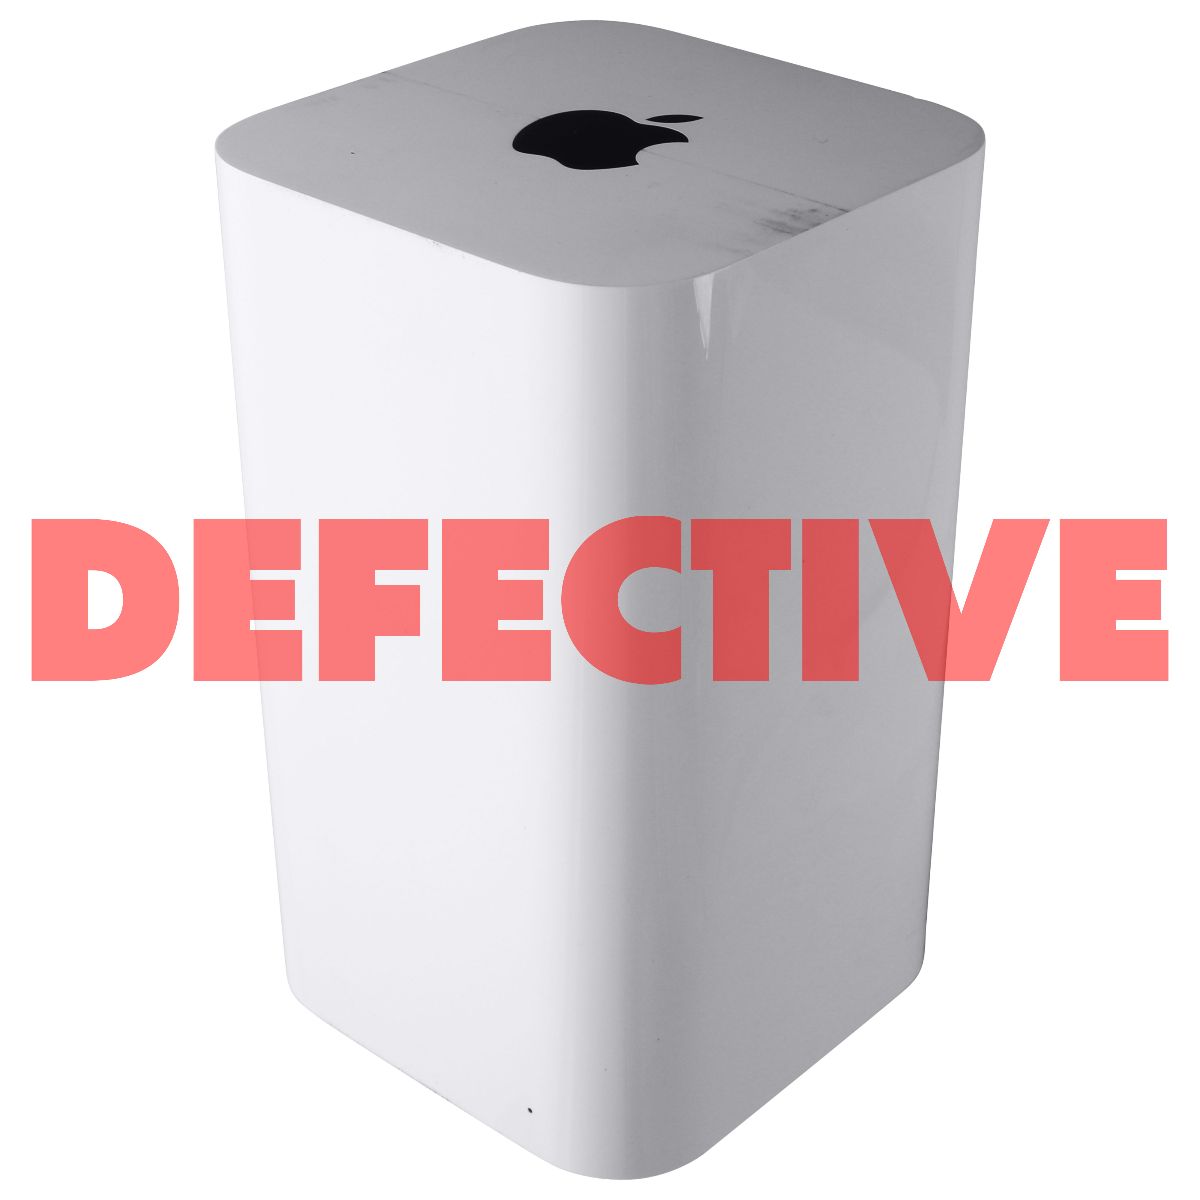 Apple AirPort Time Capsule 802.11ac - White / 2TB (A1470, 5th Gen